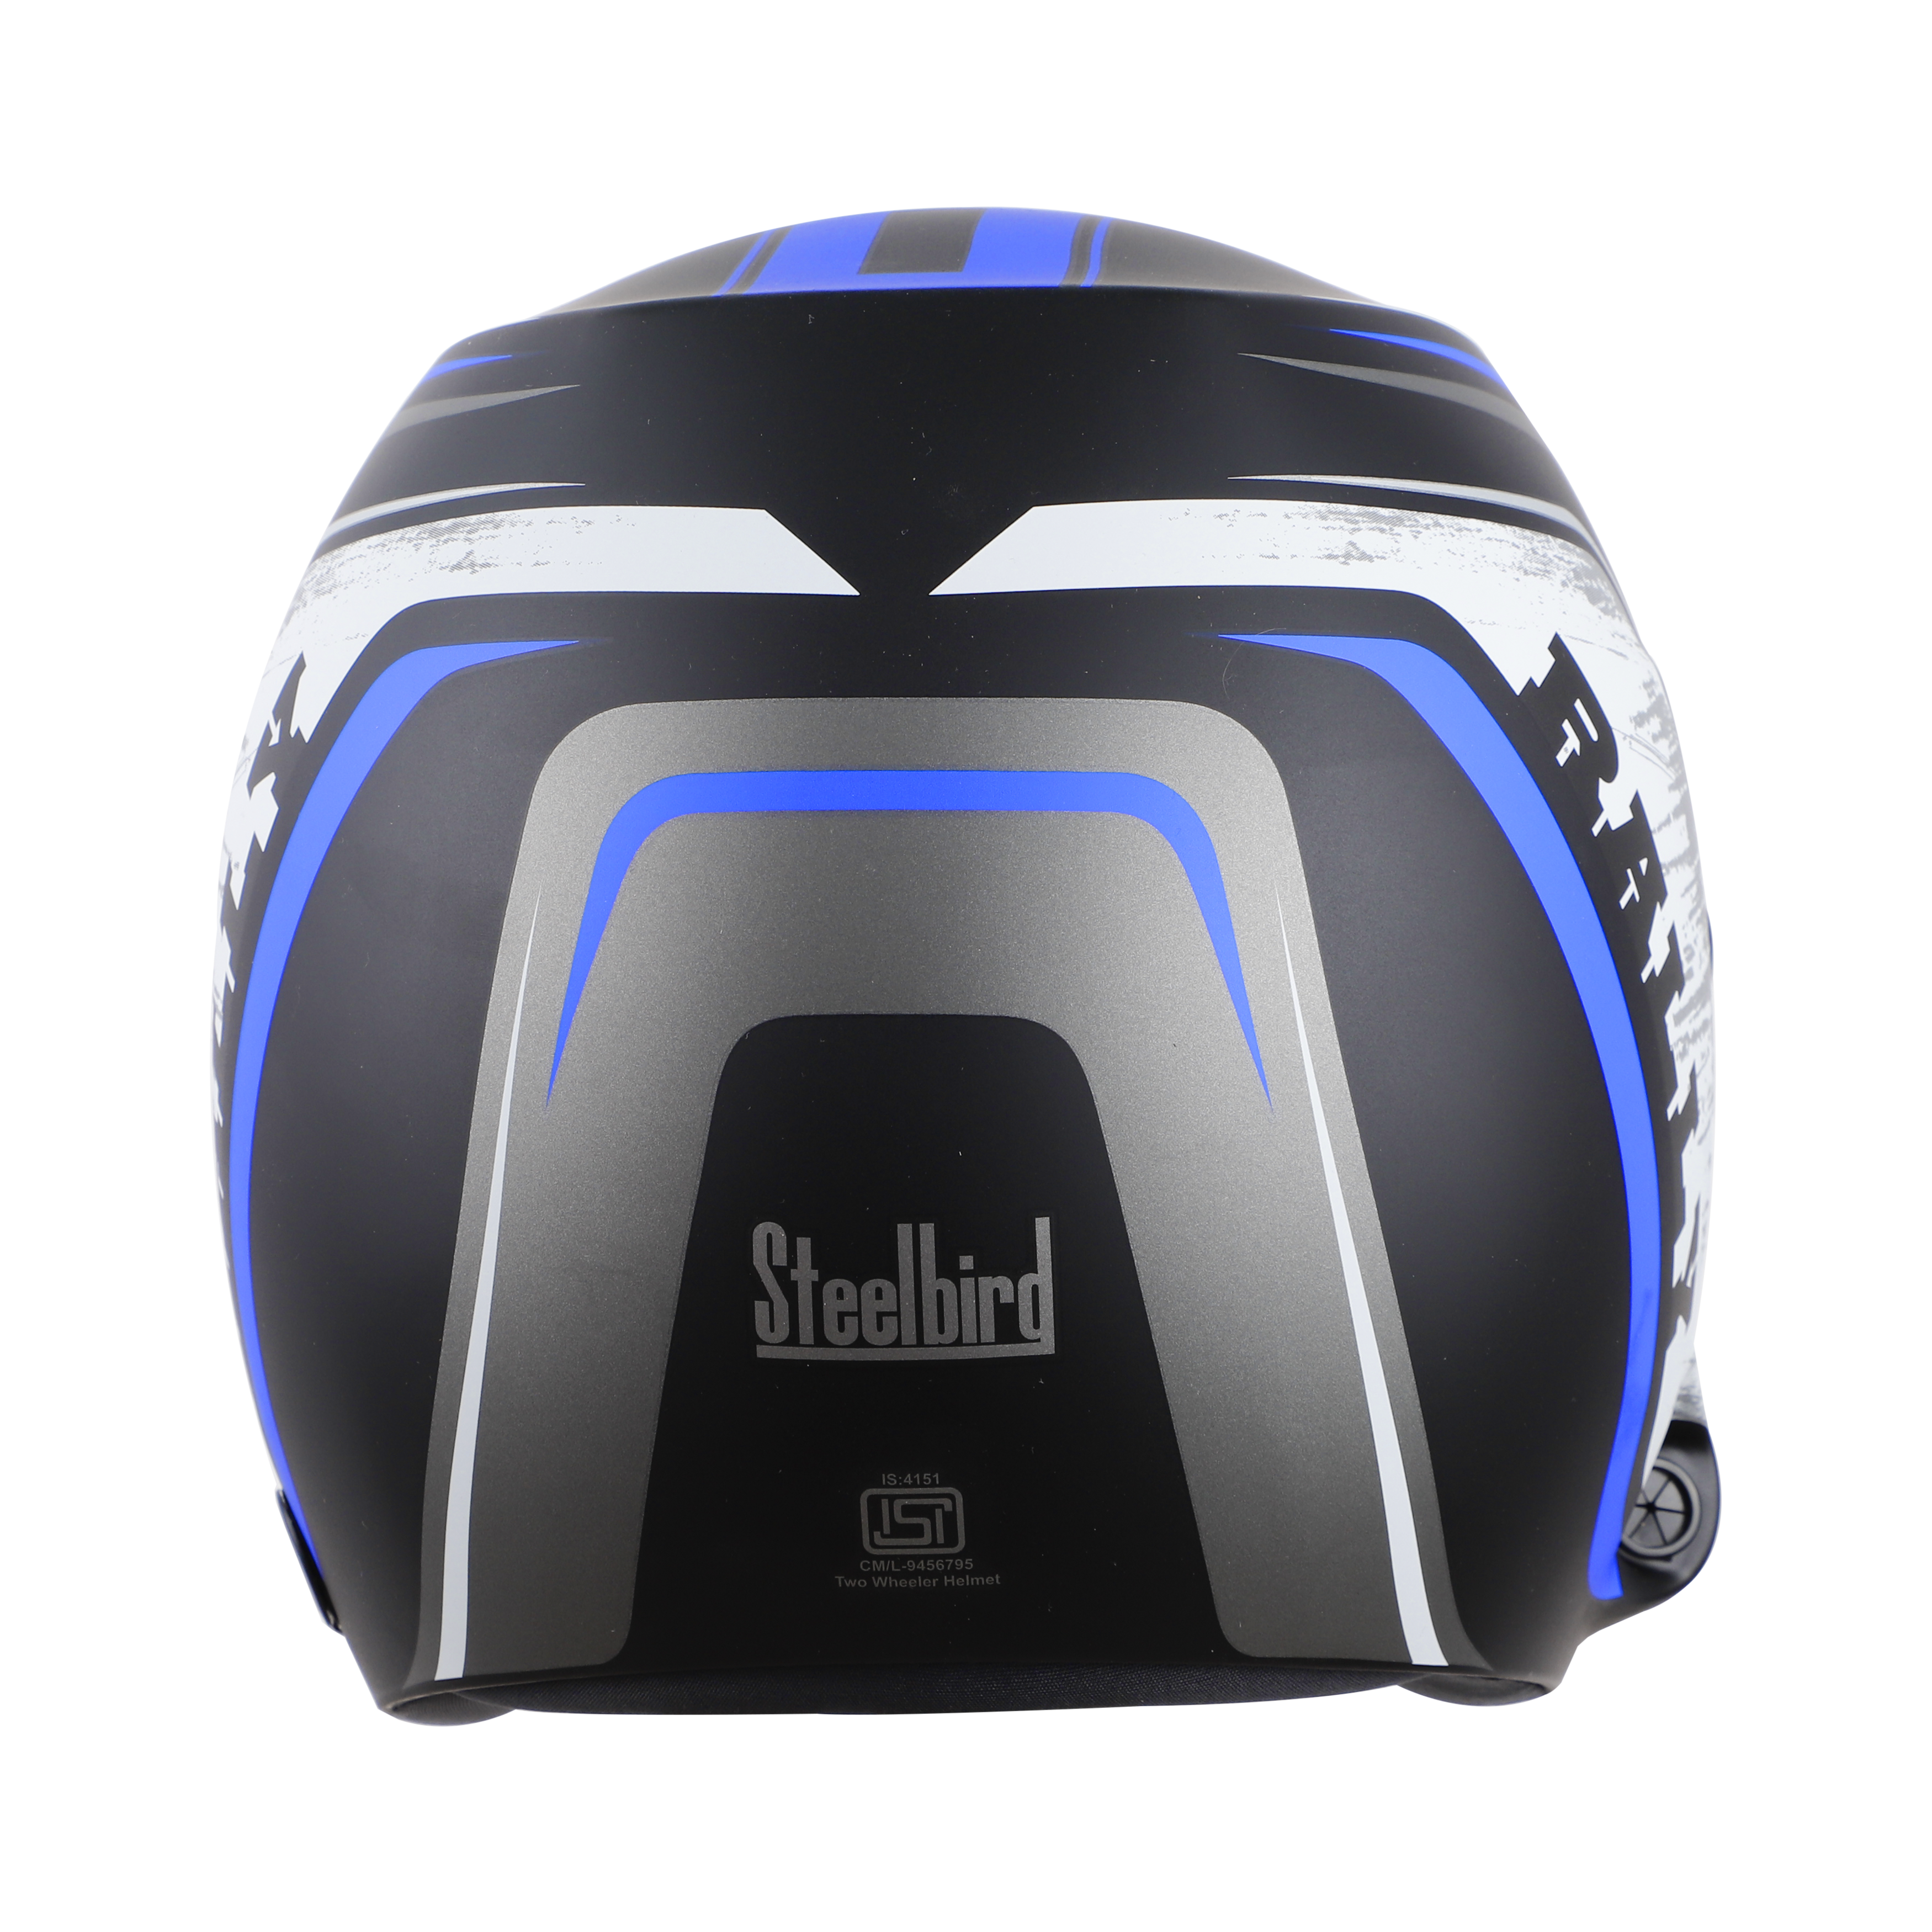 SB-51 RALLY RUT MAT BLACK WITH BLUE ( FITTED WITH CLEAR VISOR EXTRA CHROME RAINBOW VISOR FREE)